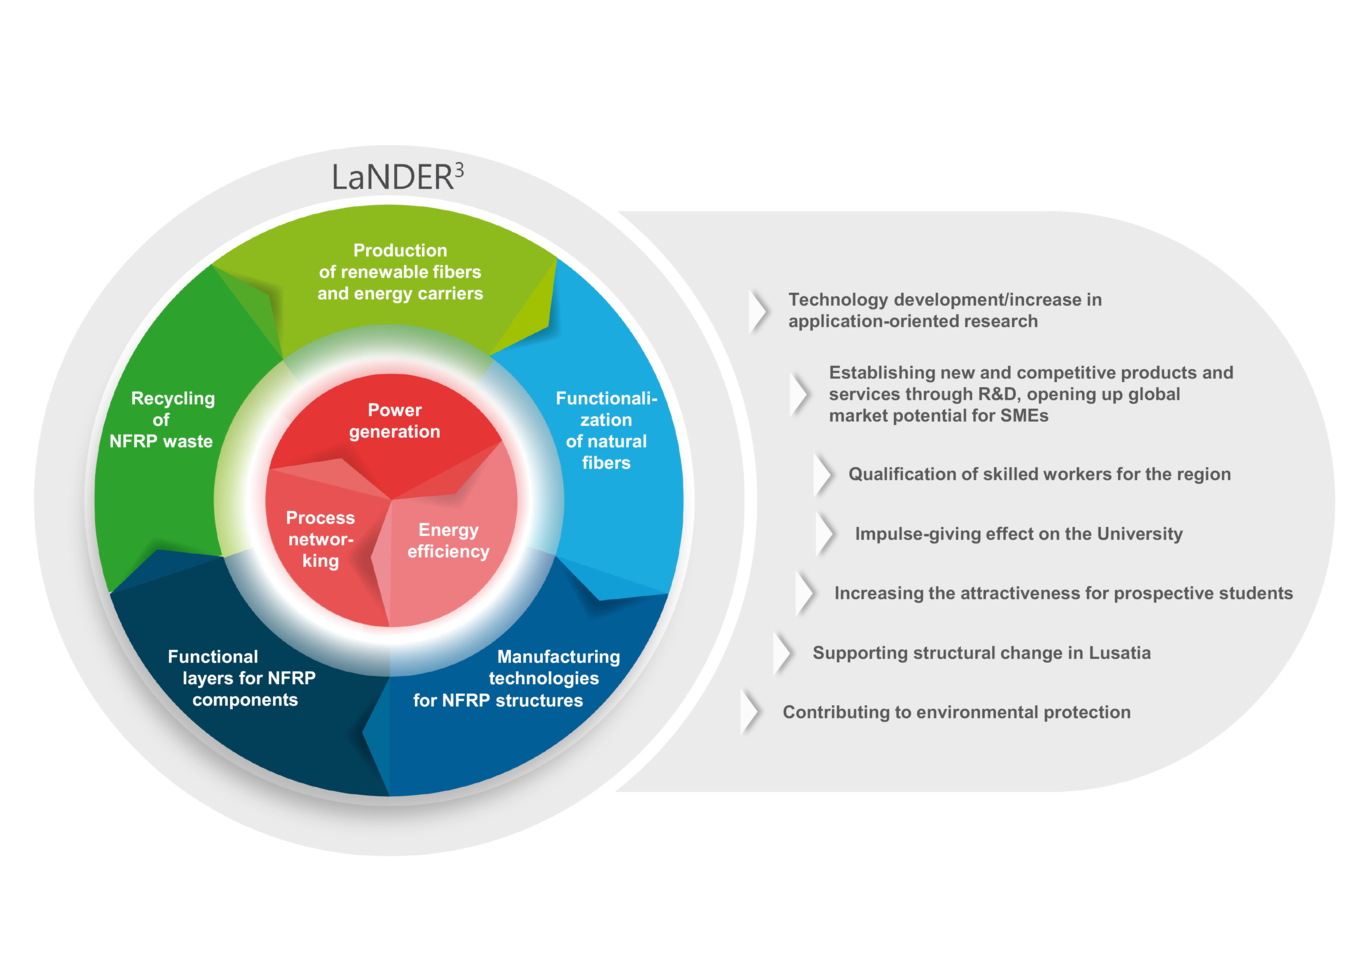 Graphical representation of the themes and strategic objectives of the LaNDER³ partnership